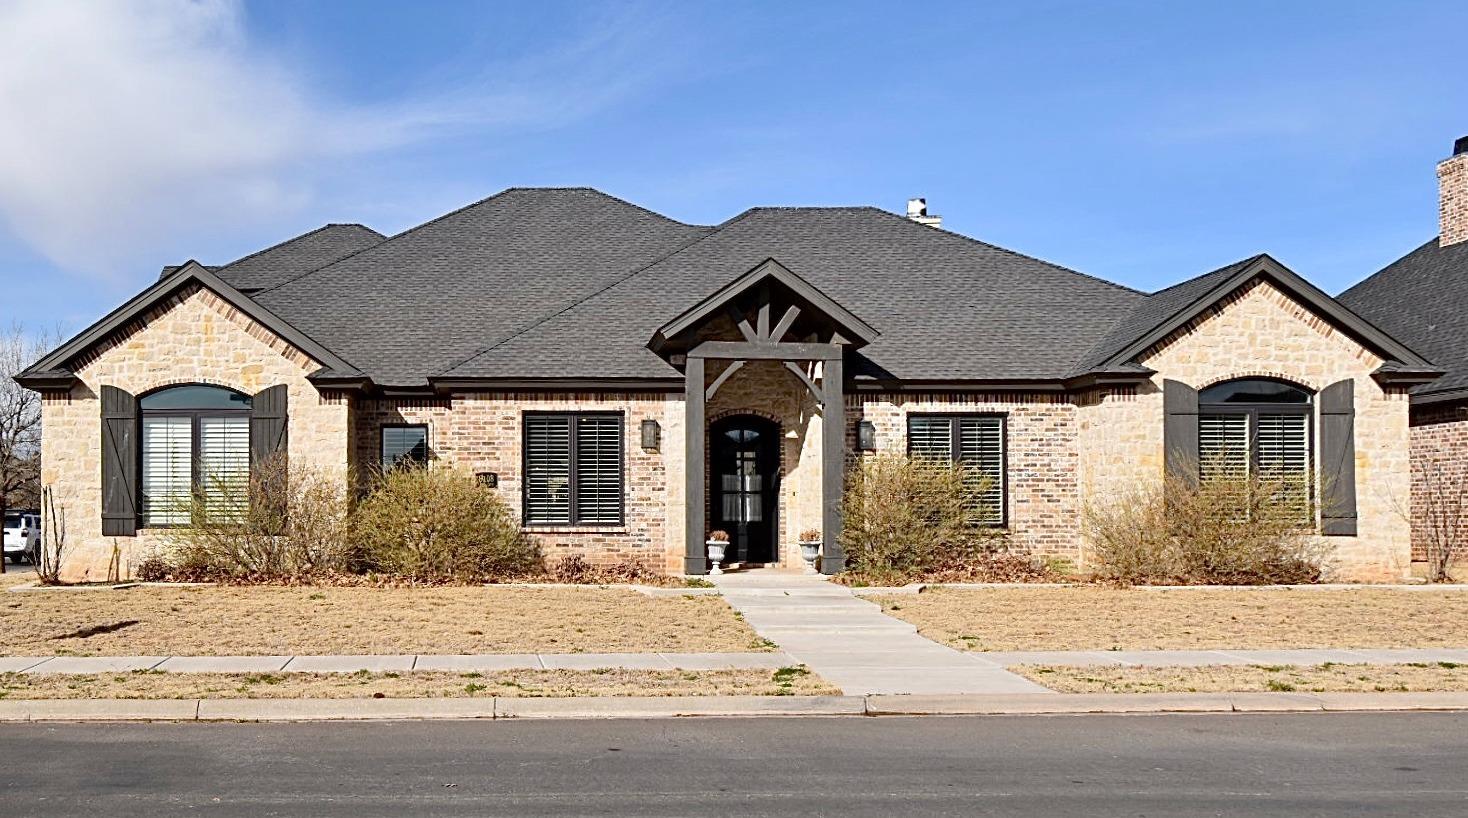 Stunning custom built 4 BR, 3.5 BA; 3 car garage. Welcome to The Trails, Lubbock's most coveted neighborhood. Enjoy morning coffee in the breakfast room while enjoying the view from the large windows that create vast natural flowing light, special barn ceiling with decorative beams in family room; cathedral ceiling in dining room, crown molding, beautiful hardwood floors; kitchen has Gas cook top, granite countertops, island & breakfast area, with oversized pantry. SS Refrigerator conveys. This beauty is a MUST SEE!!